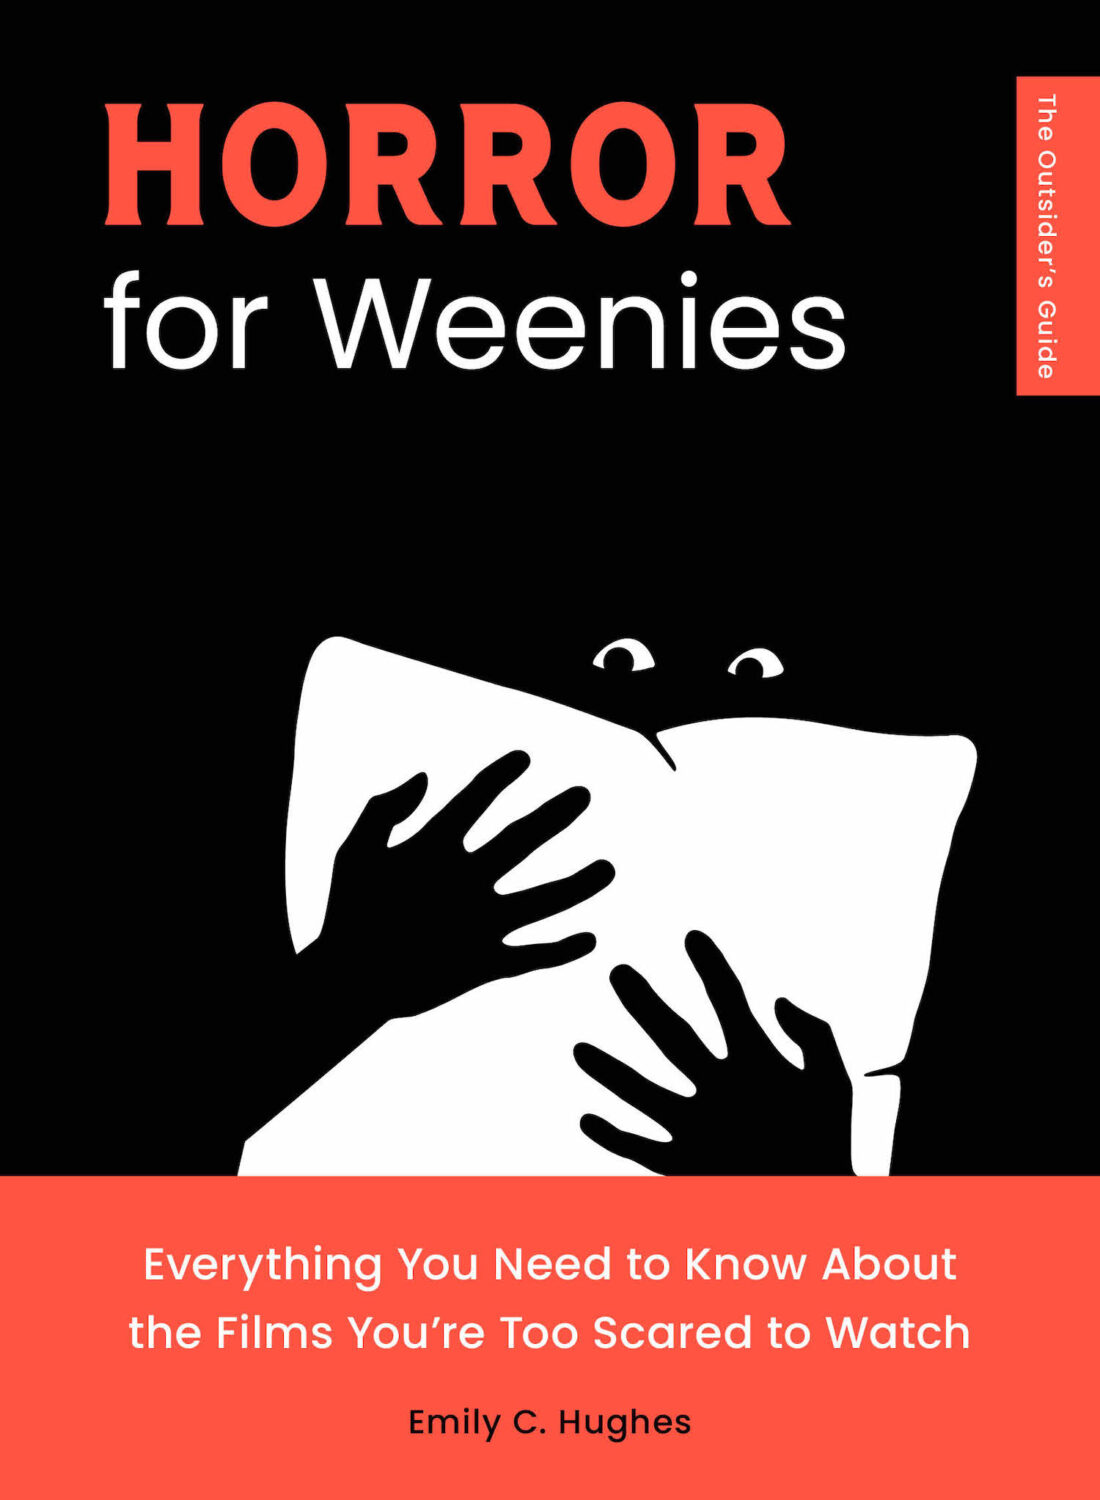 Book cover of Horror for Weenies by Emily C. Huges